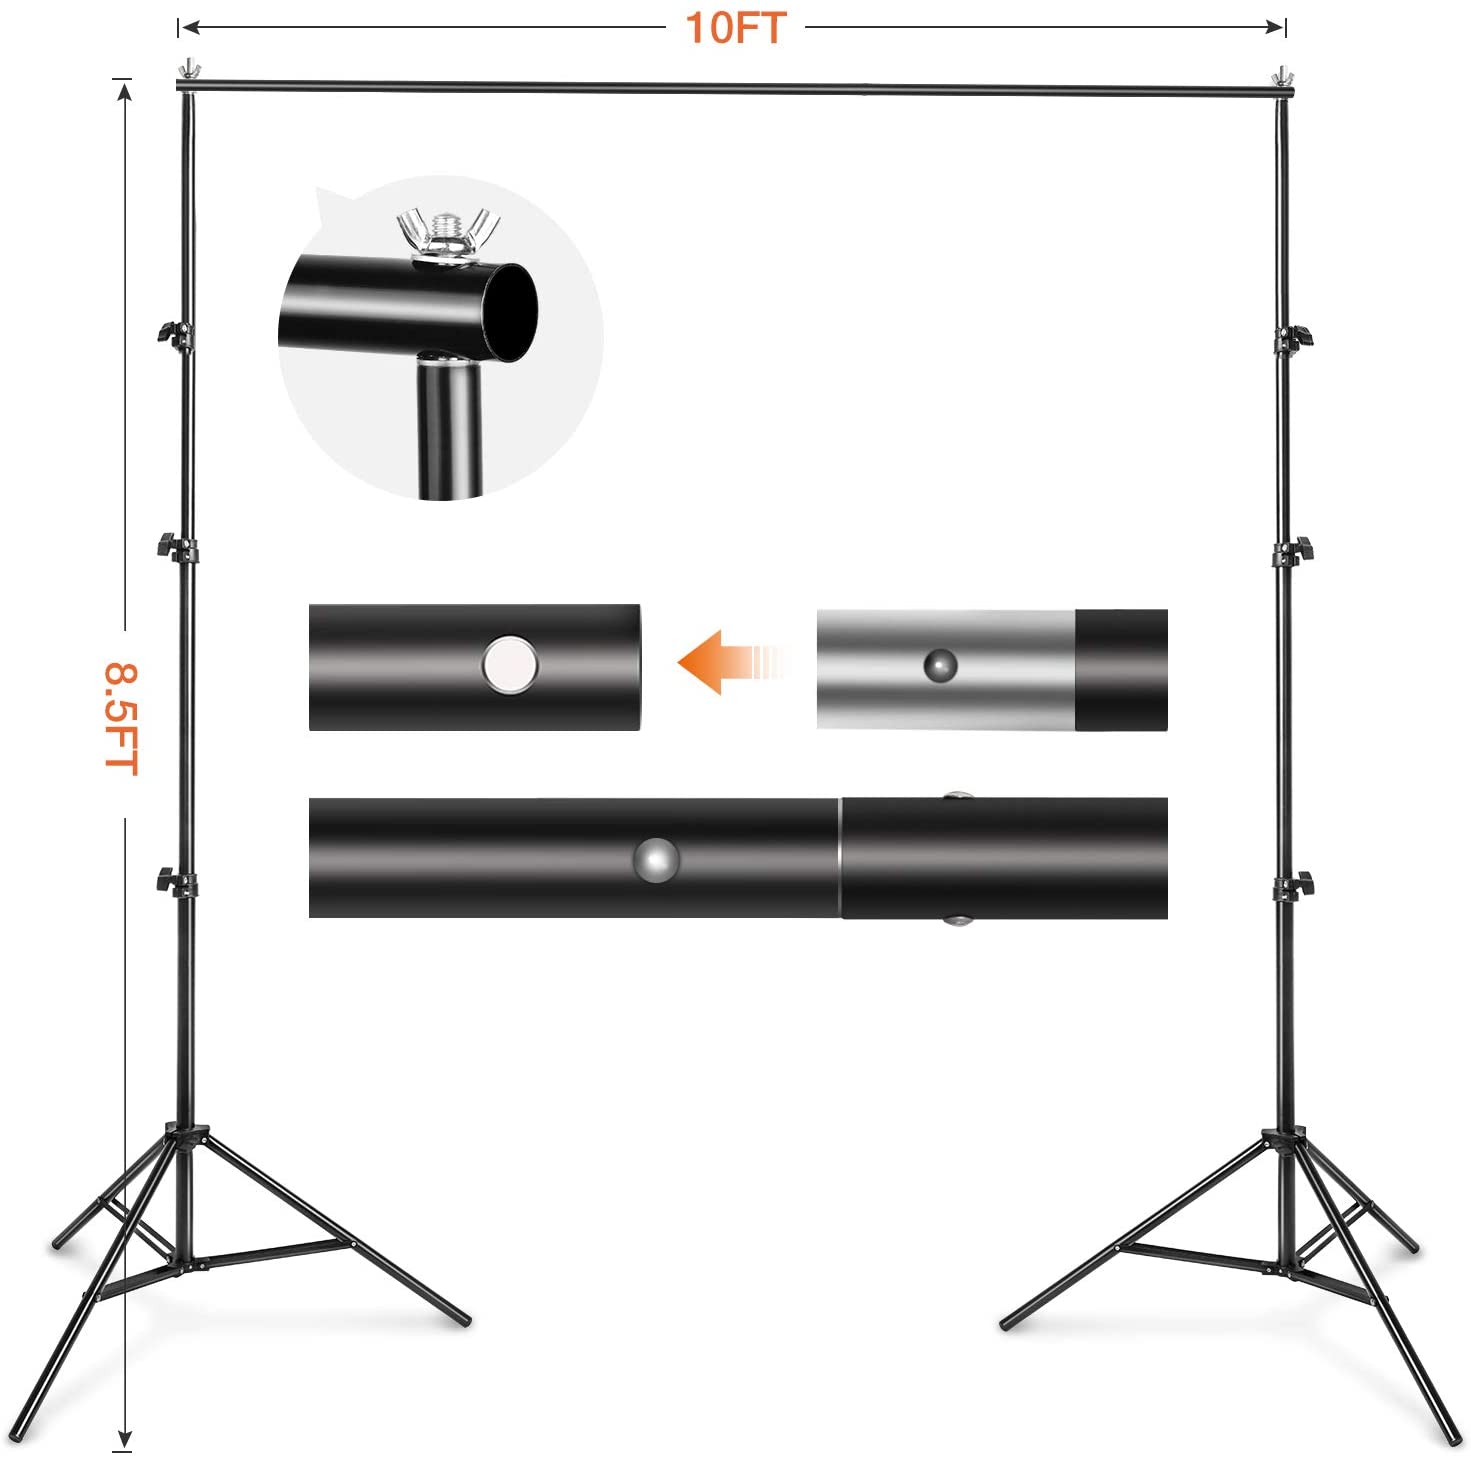 Yesker Video Studio  x 10ft Green Screen Backdrop Stand Kit with 6 x 9ft  Muslin Chromakey for Portrait, Product Photography and Video Shooting <!--  Global site tag () - Google Ads: